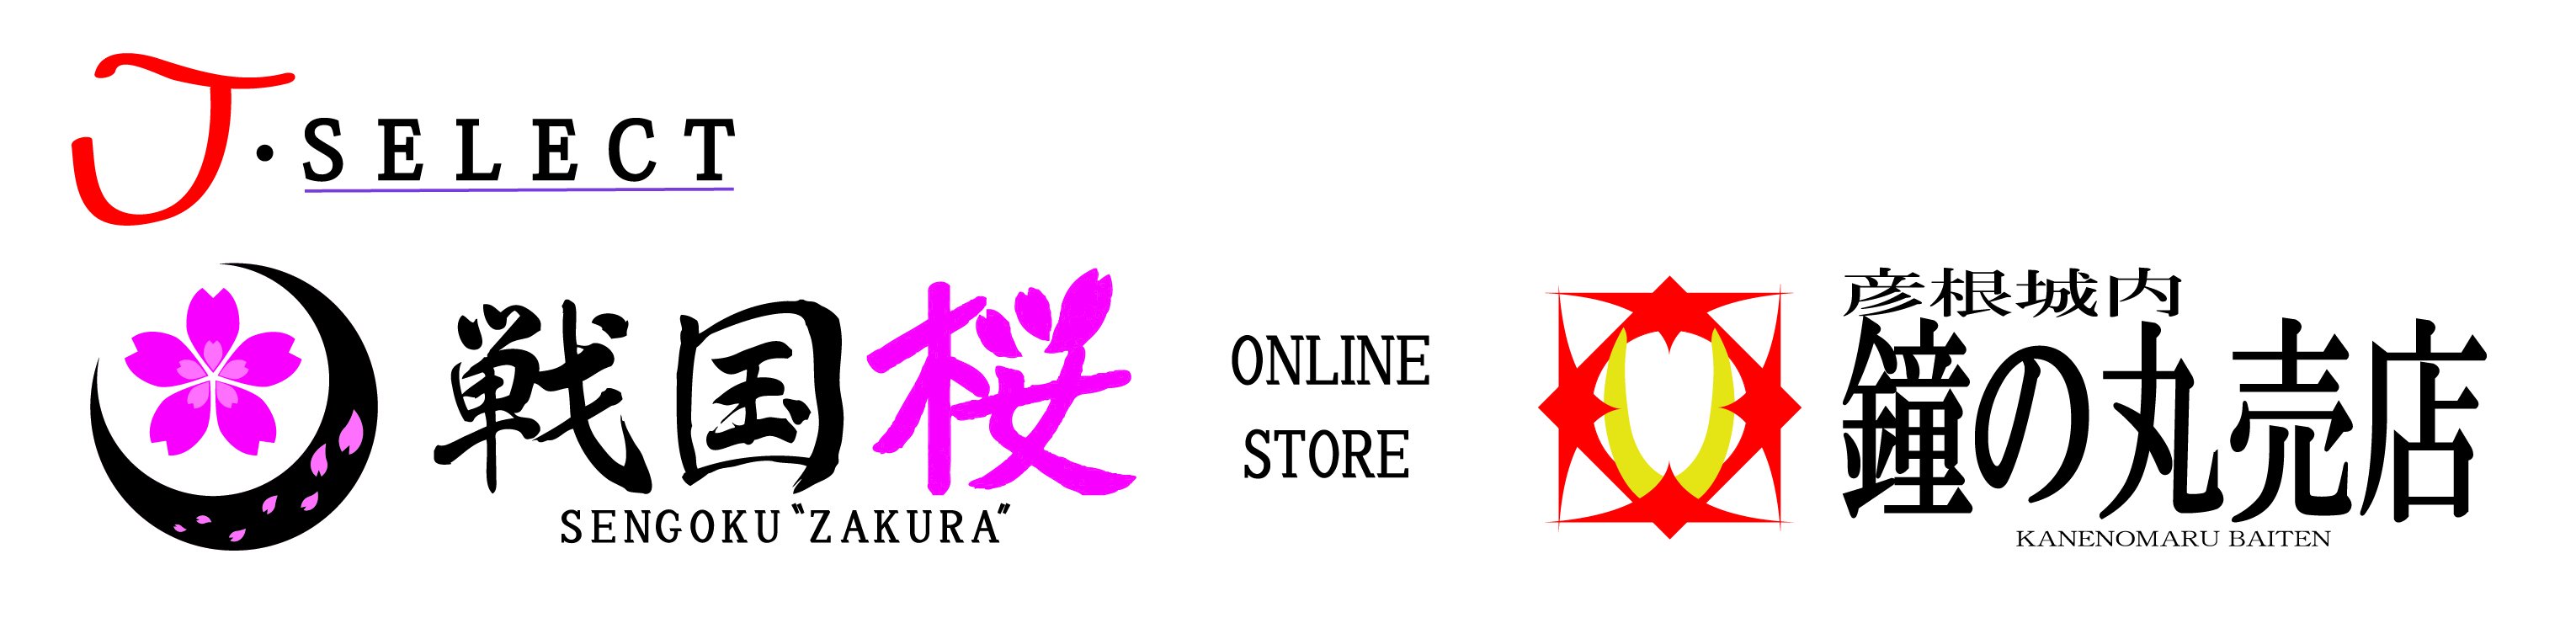 J-SELECT ONLINE STORE